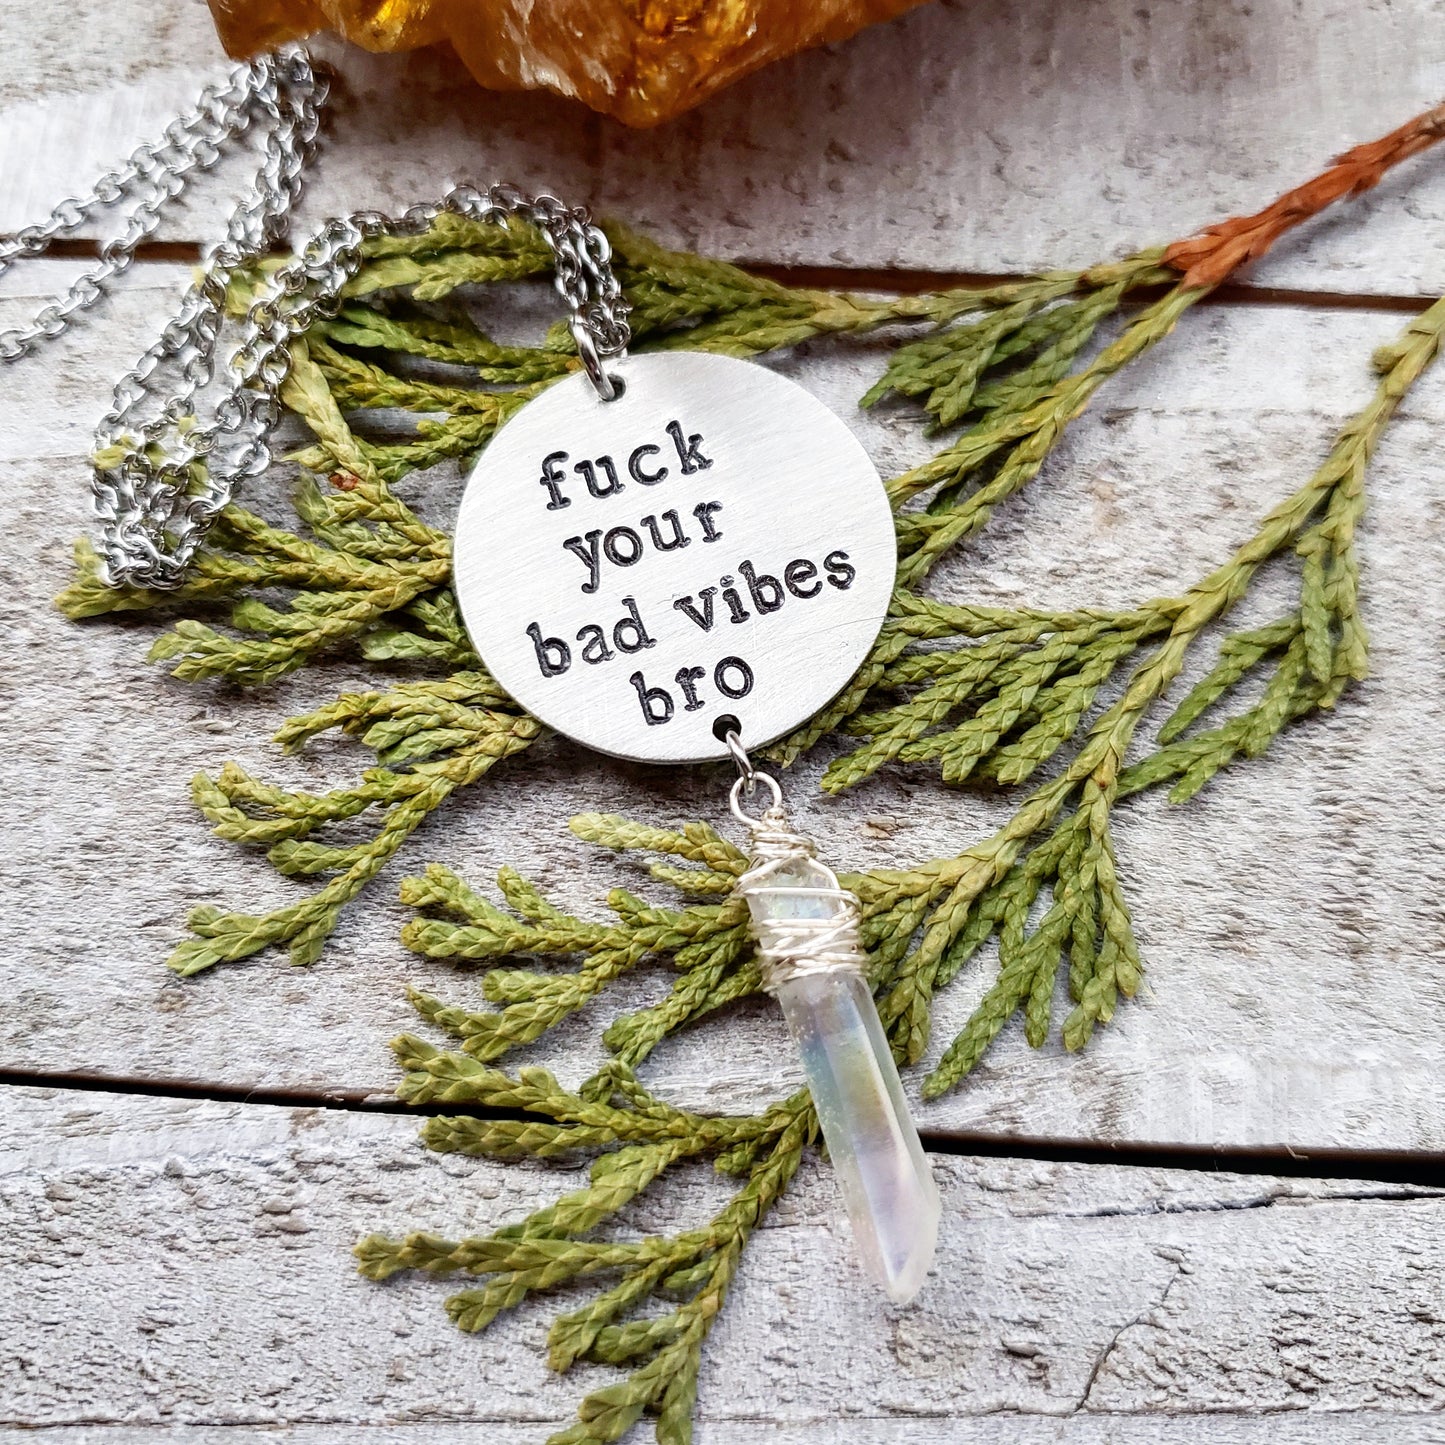 F*ck your bad vibes bro necklace